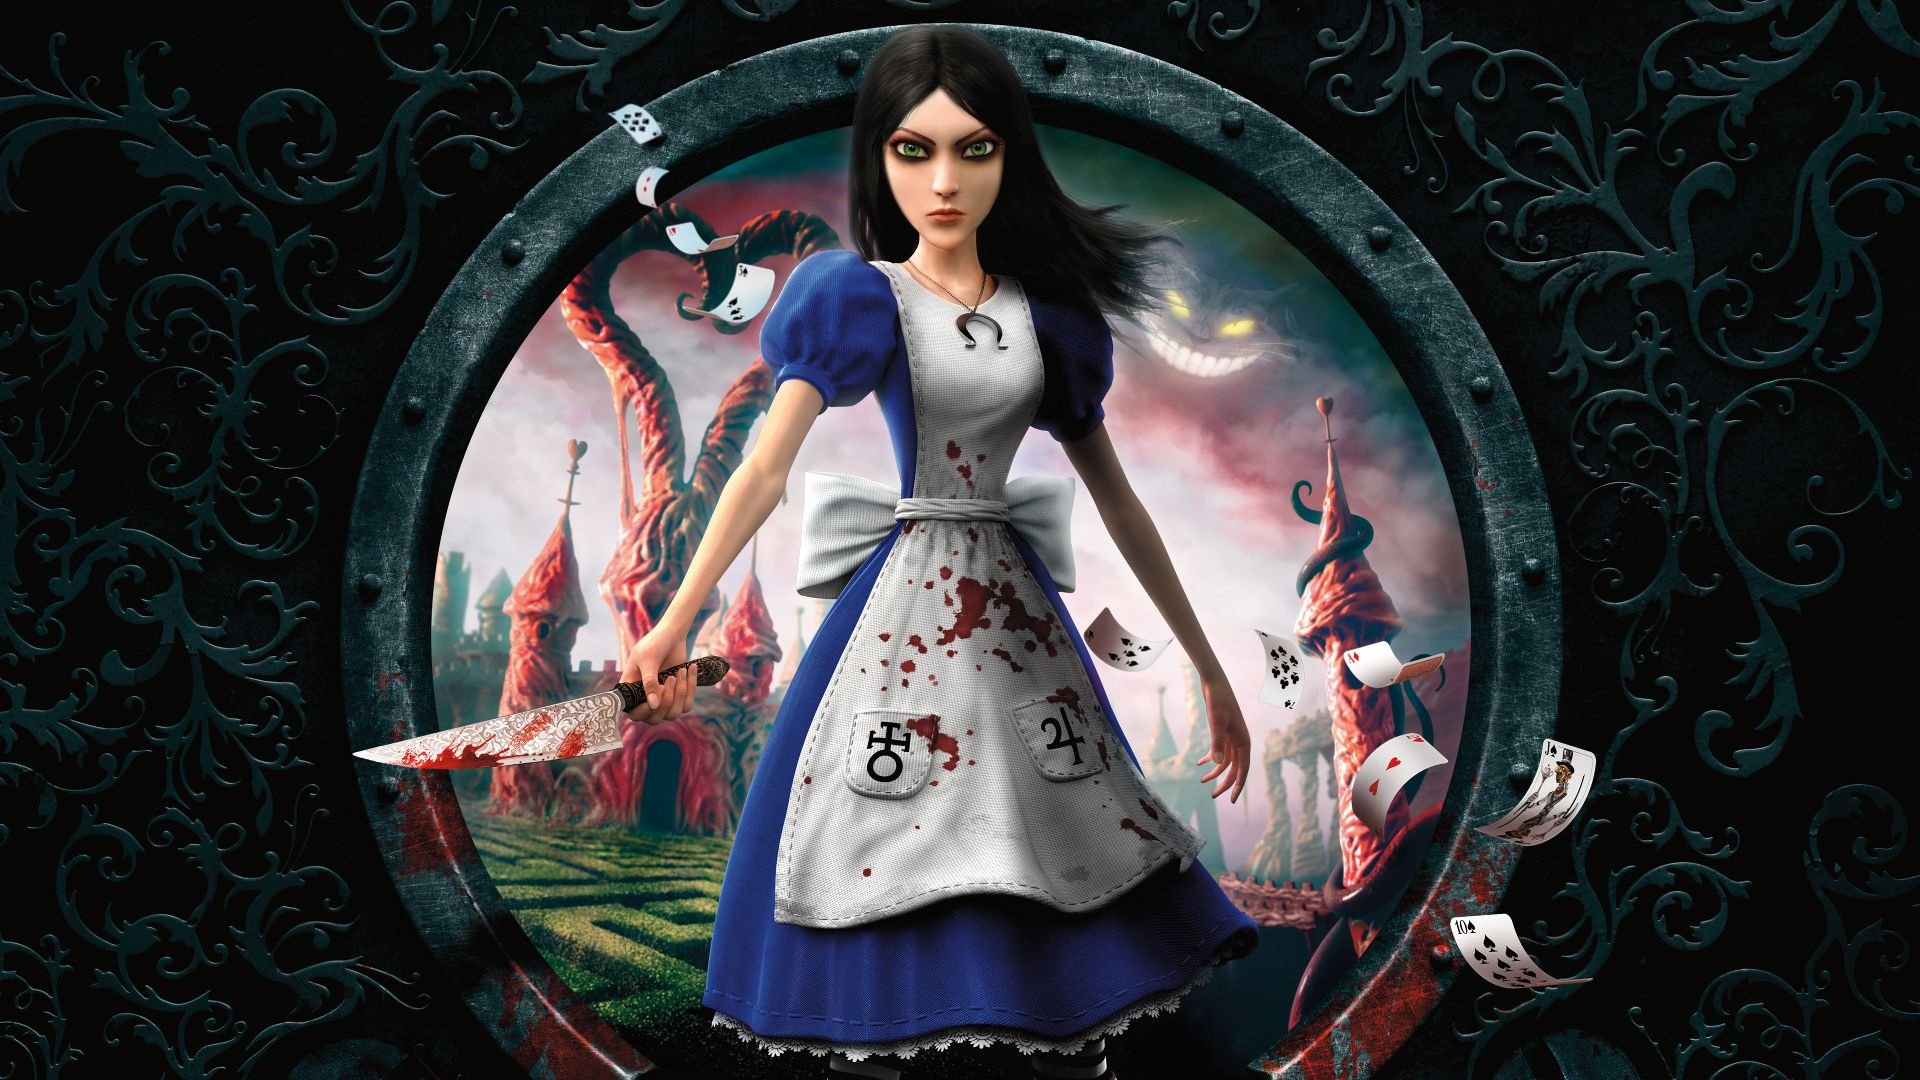 Development On A New Alice Game From American Mcgee Is Underway Push Square